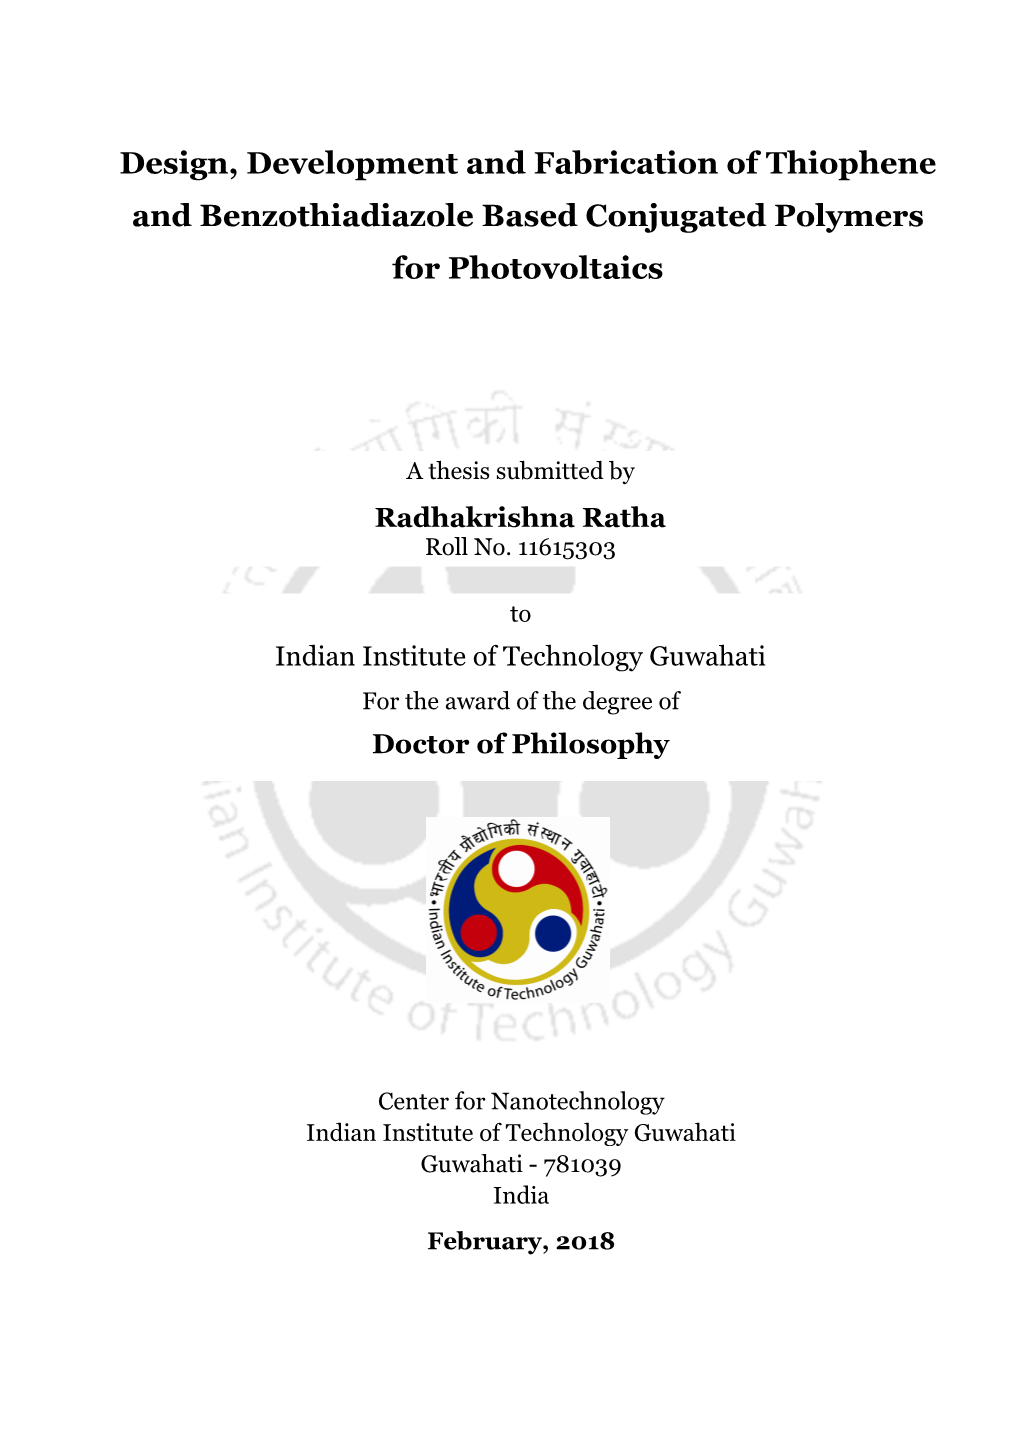 Design, Development and Fabrication of Thiophene and Benzothiadiazole Based Conjugated Polymers for Photovoltaics” Is Divided Into Five Chapters